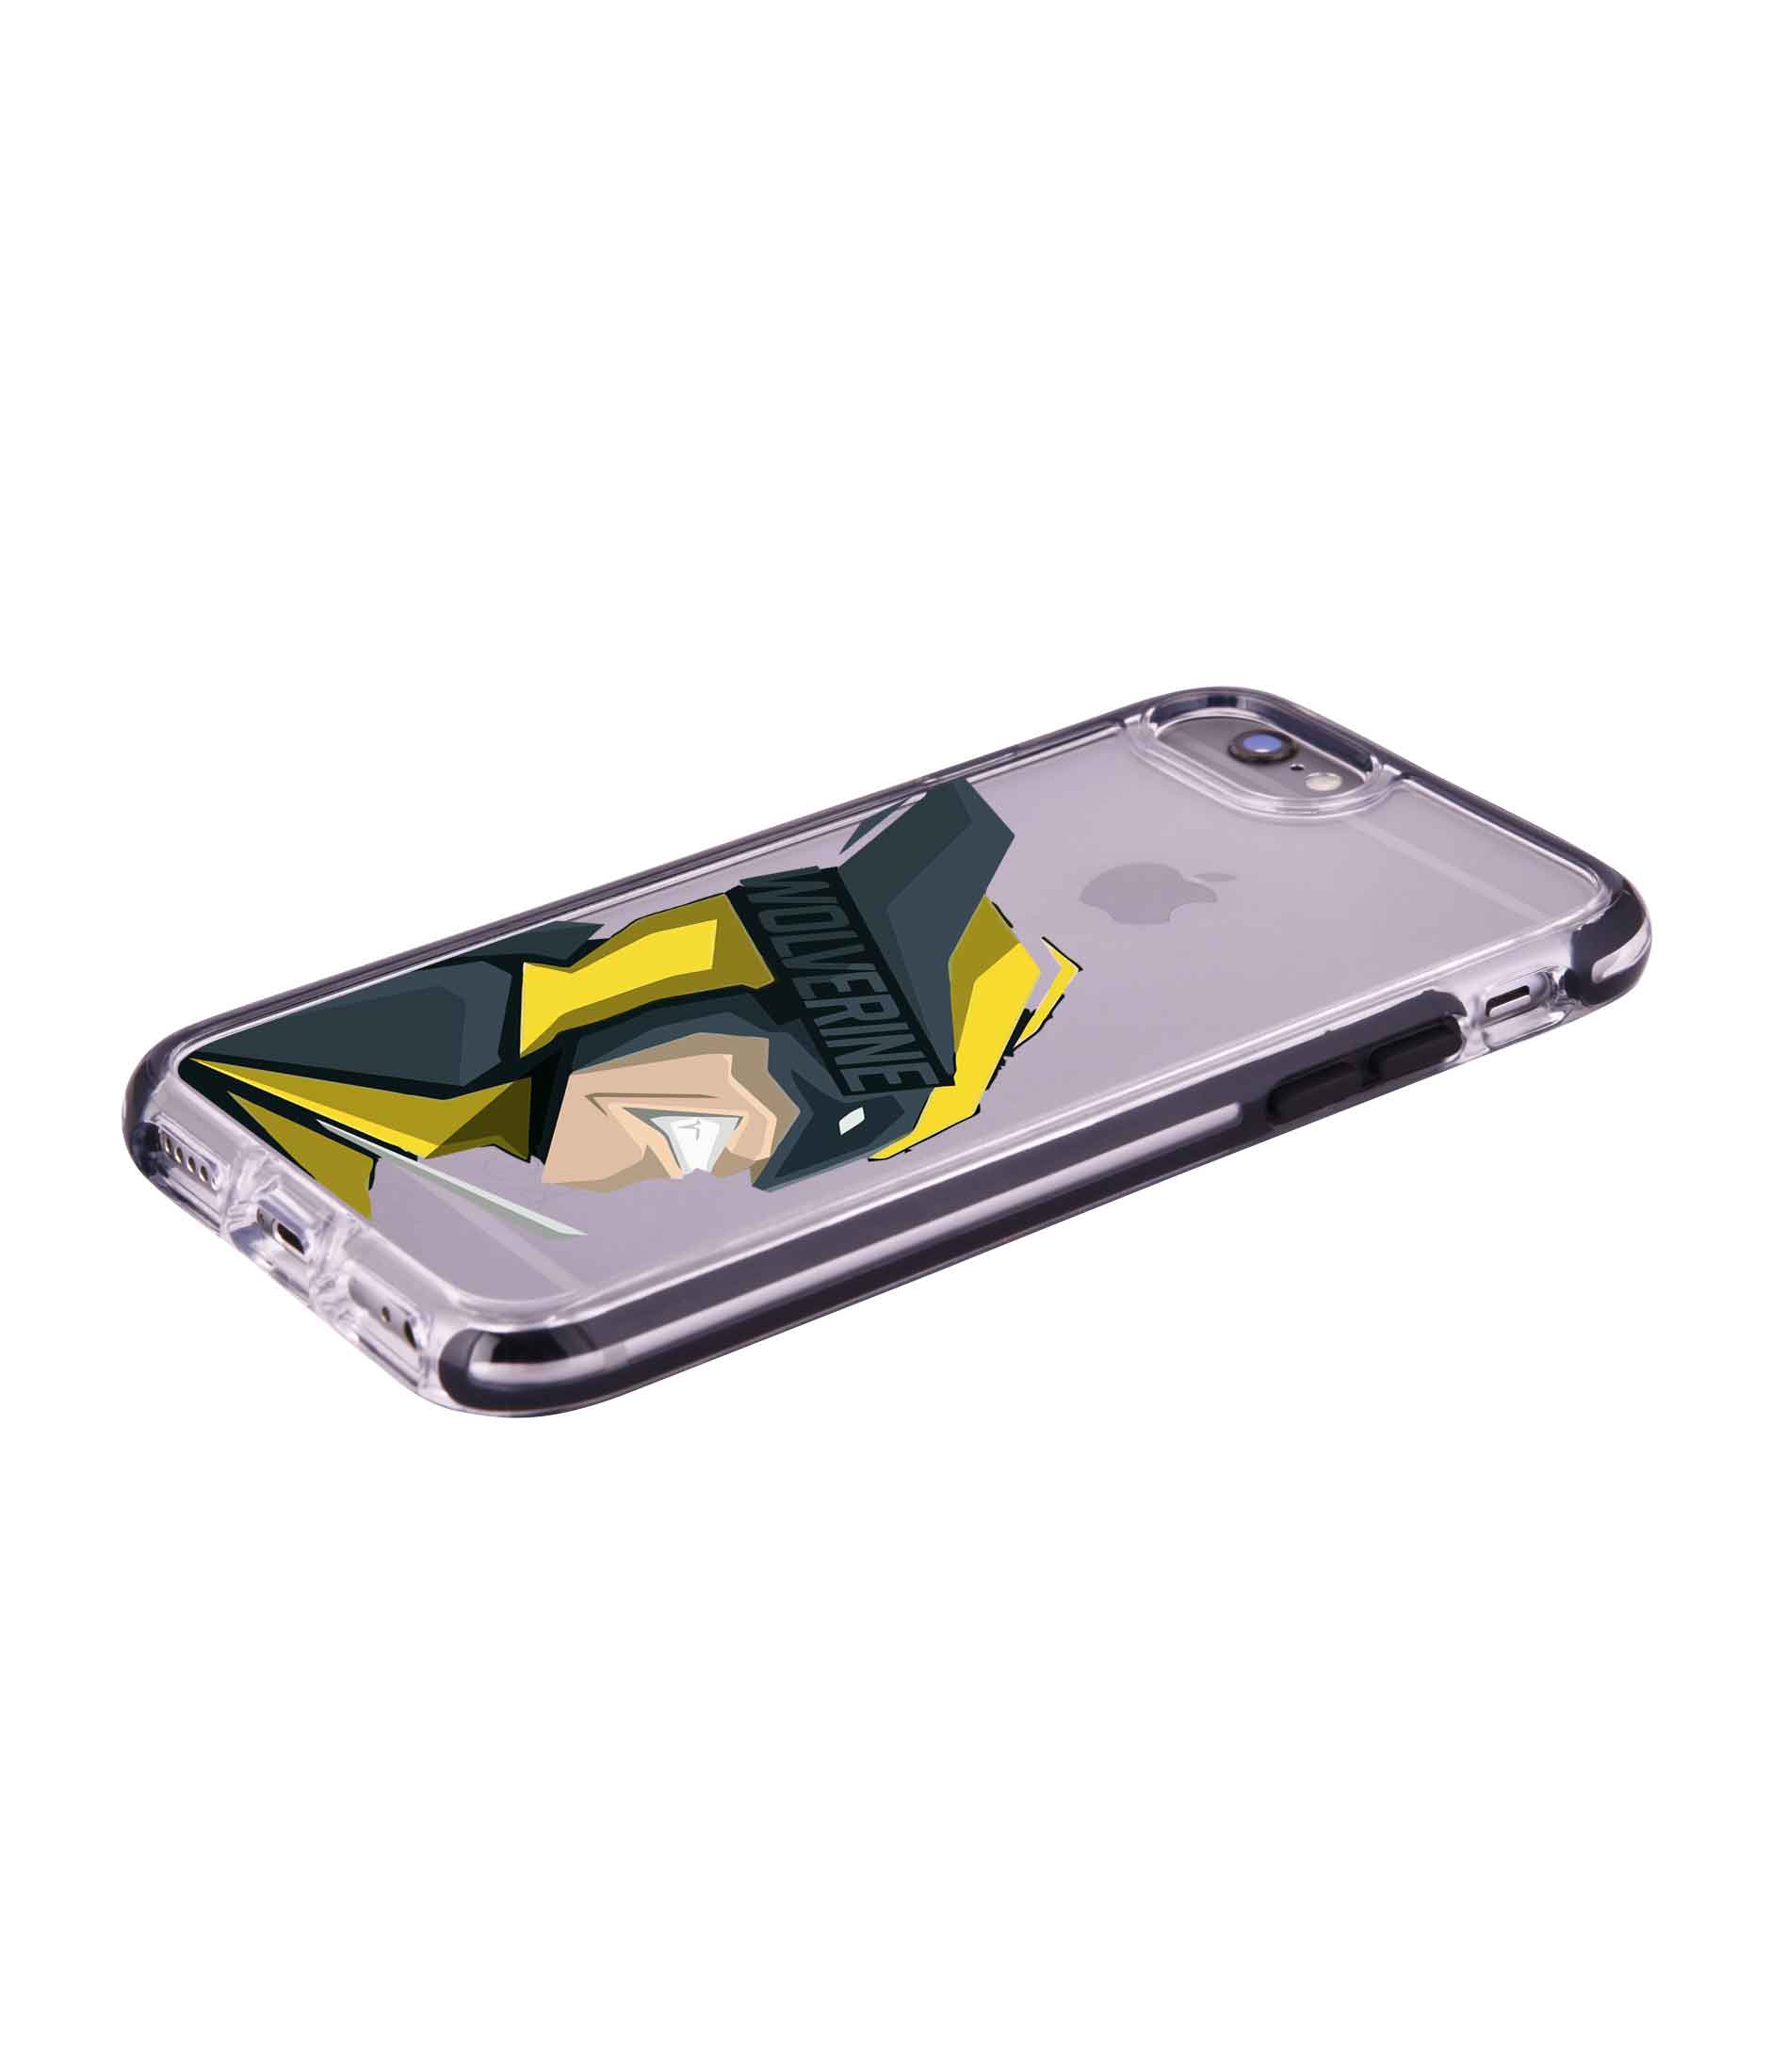 Dont Mess with Wolverine - Extreme Phone Case for iPhone 6